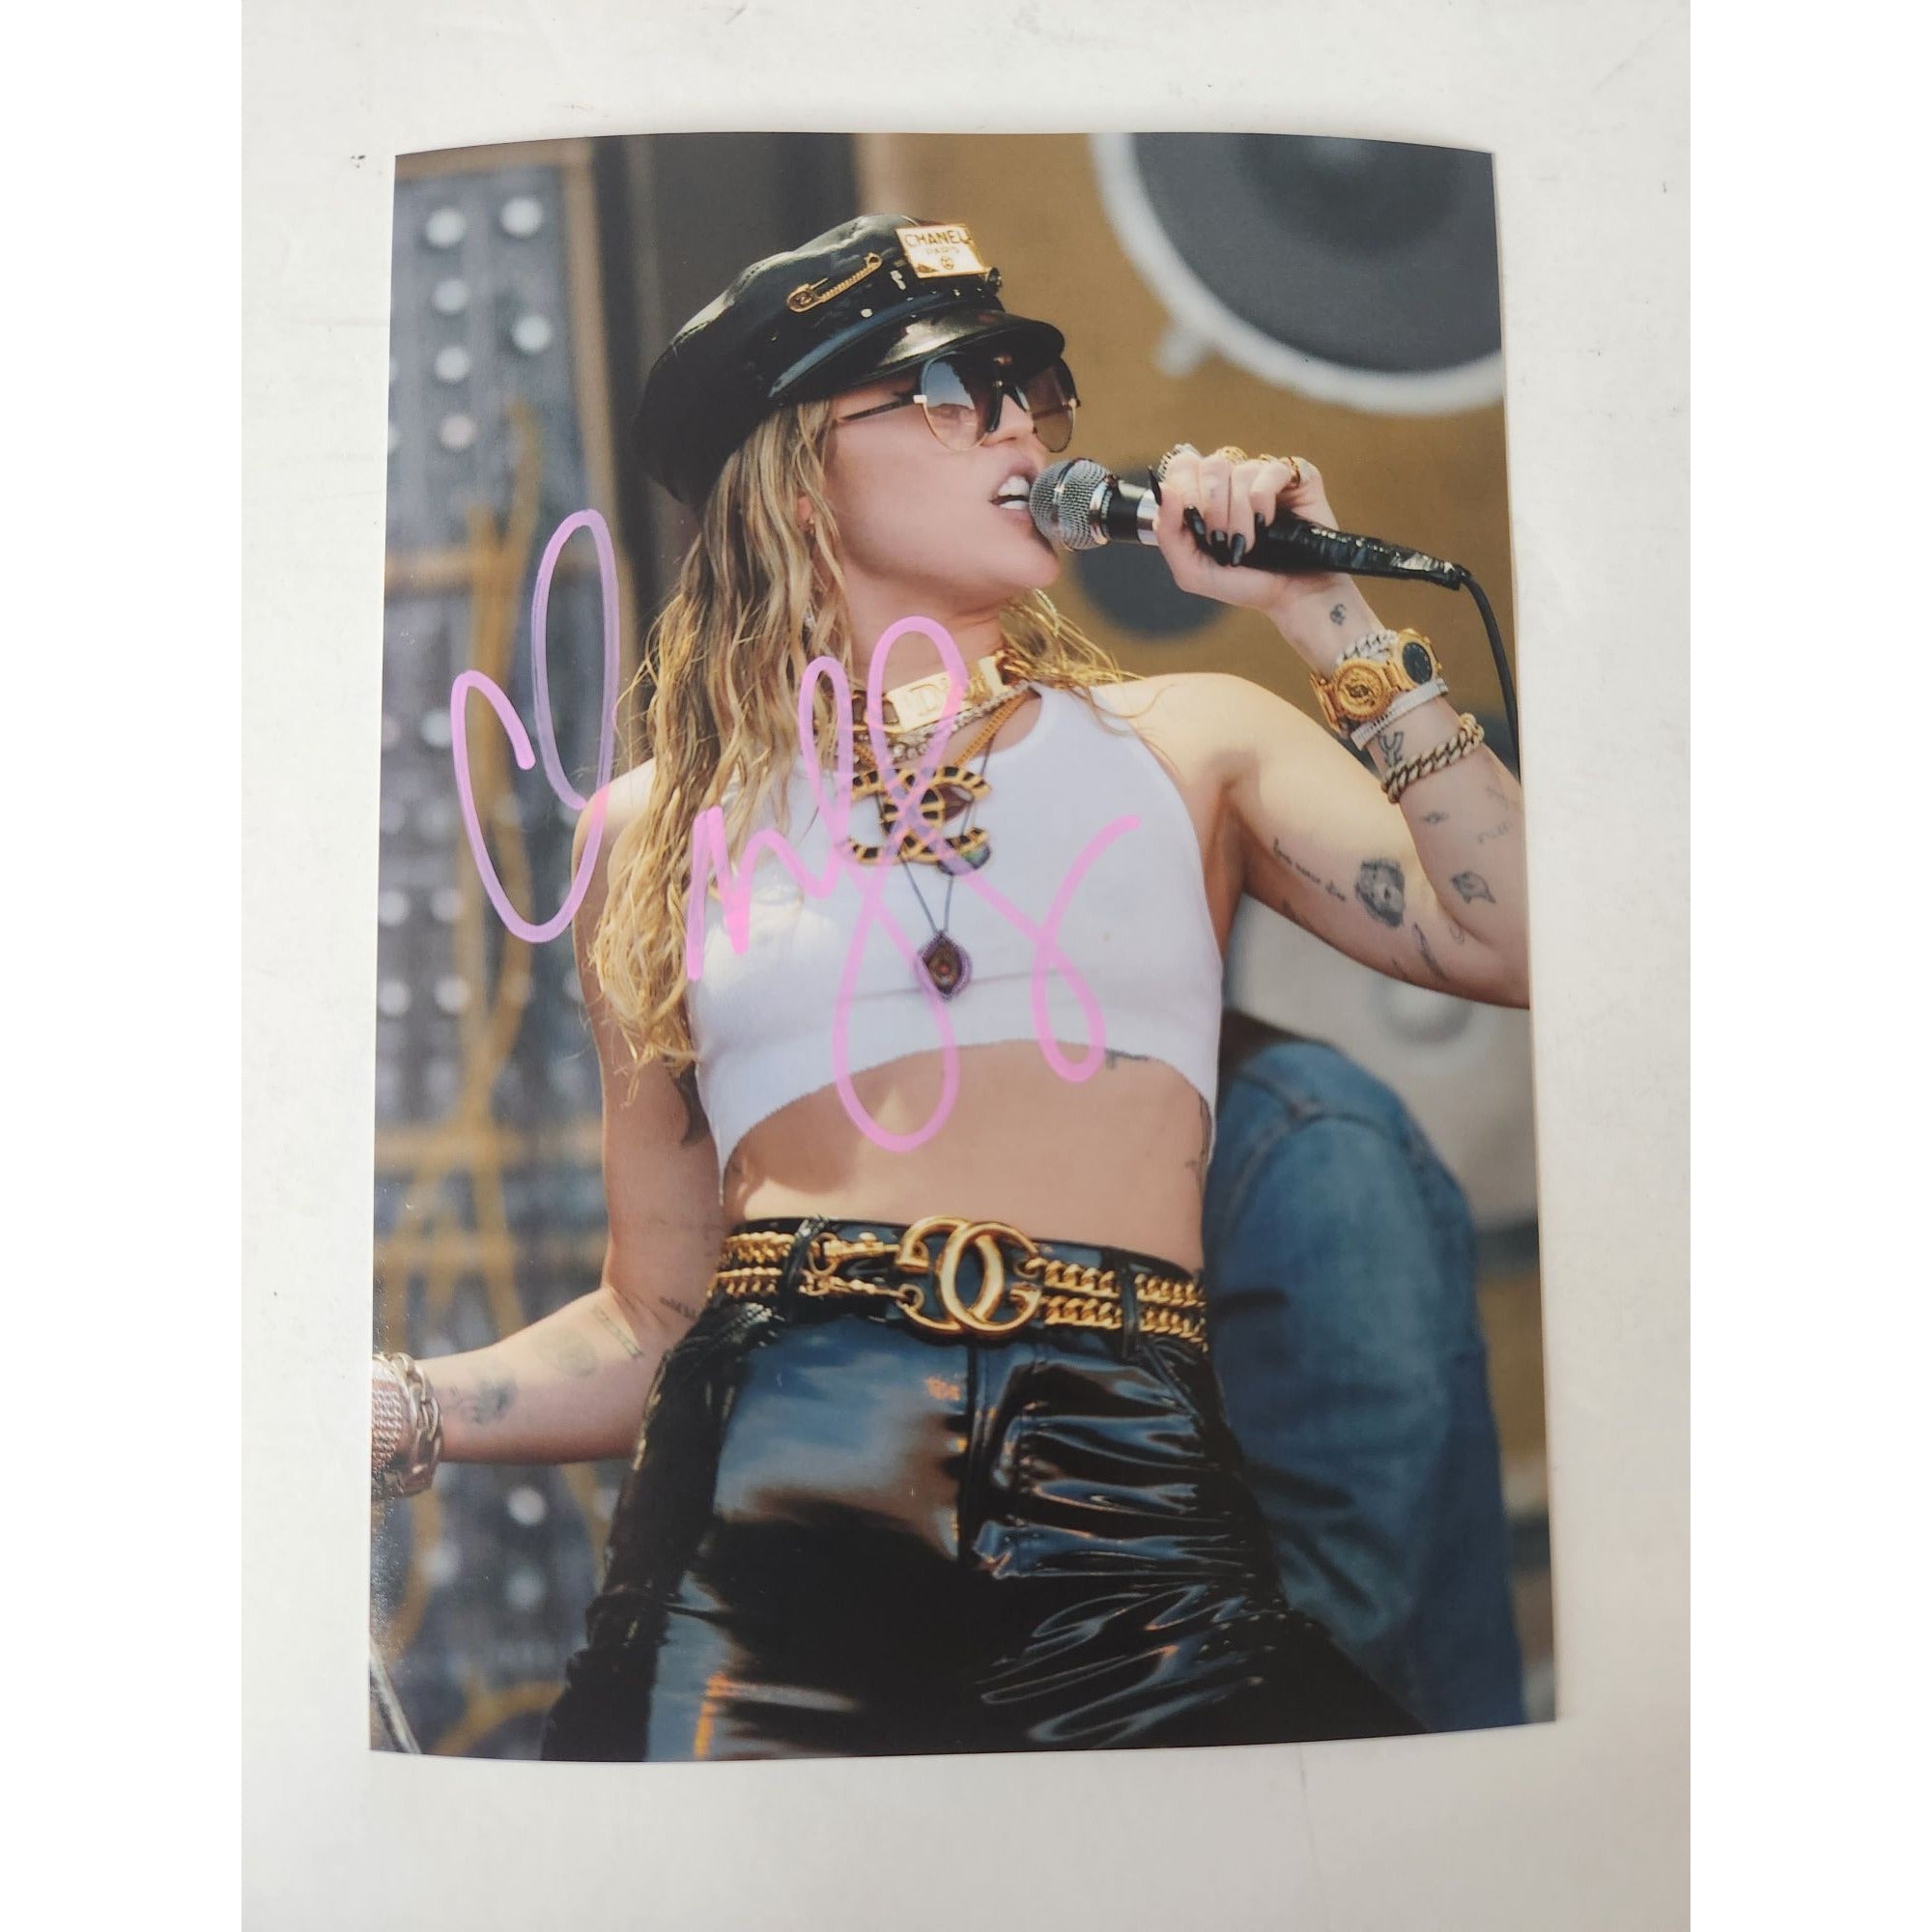 Miley Cyrus 5x7 photo signed with proof